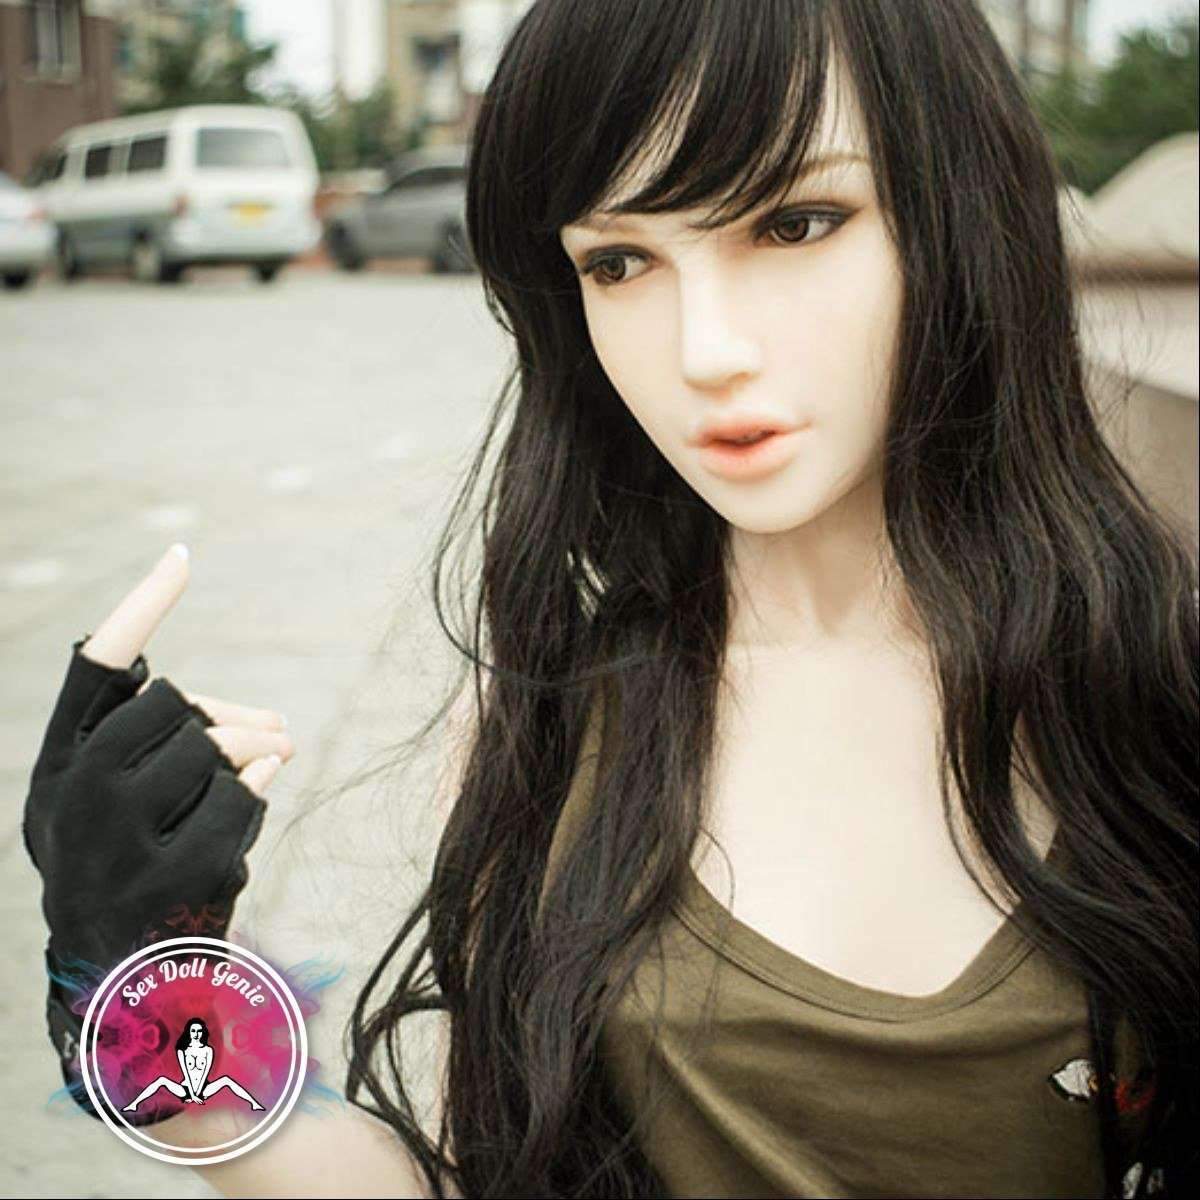 DS Doll - 163Plus - Sandy Head - Type 1 D Cup Silicone Doll-14